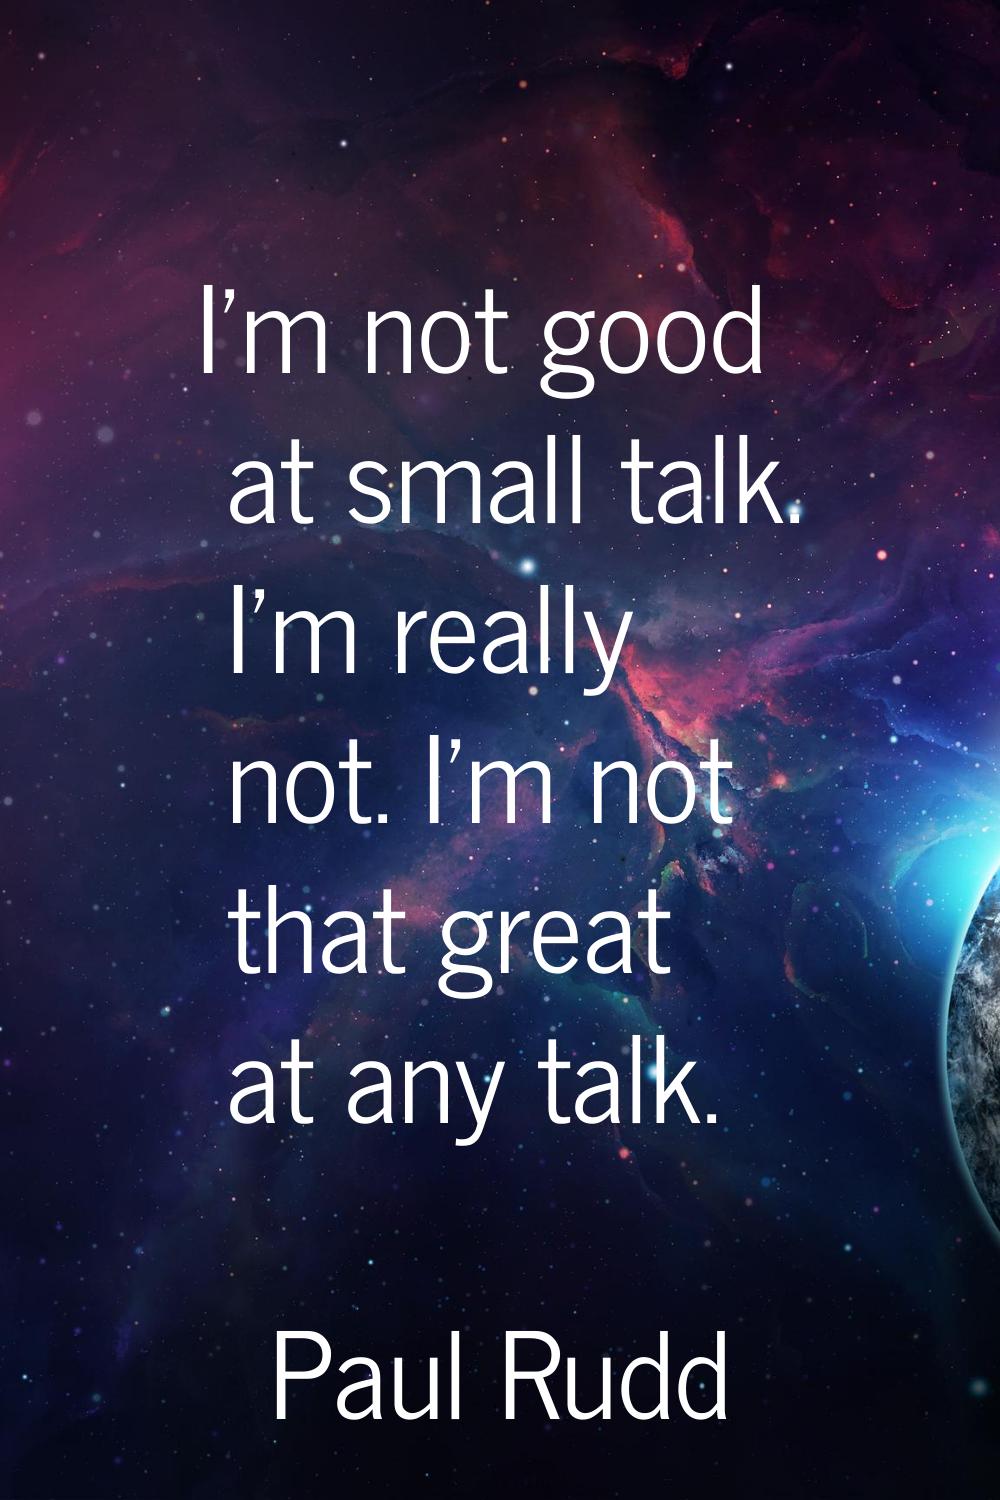 I'm not good at small talk. I'm really not. I'm not that great at any talk.